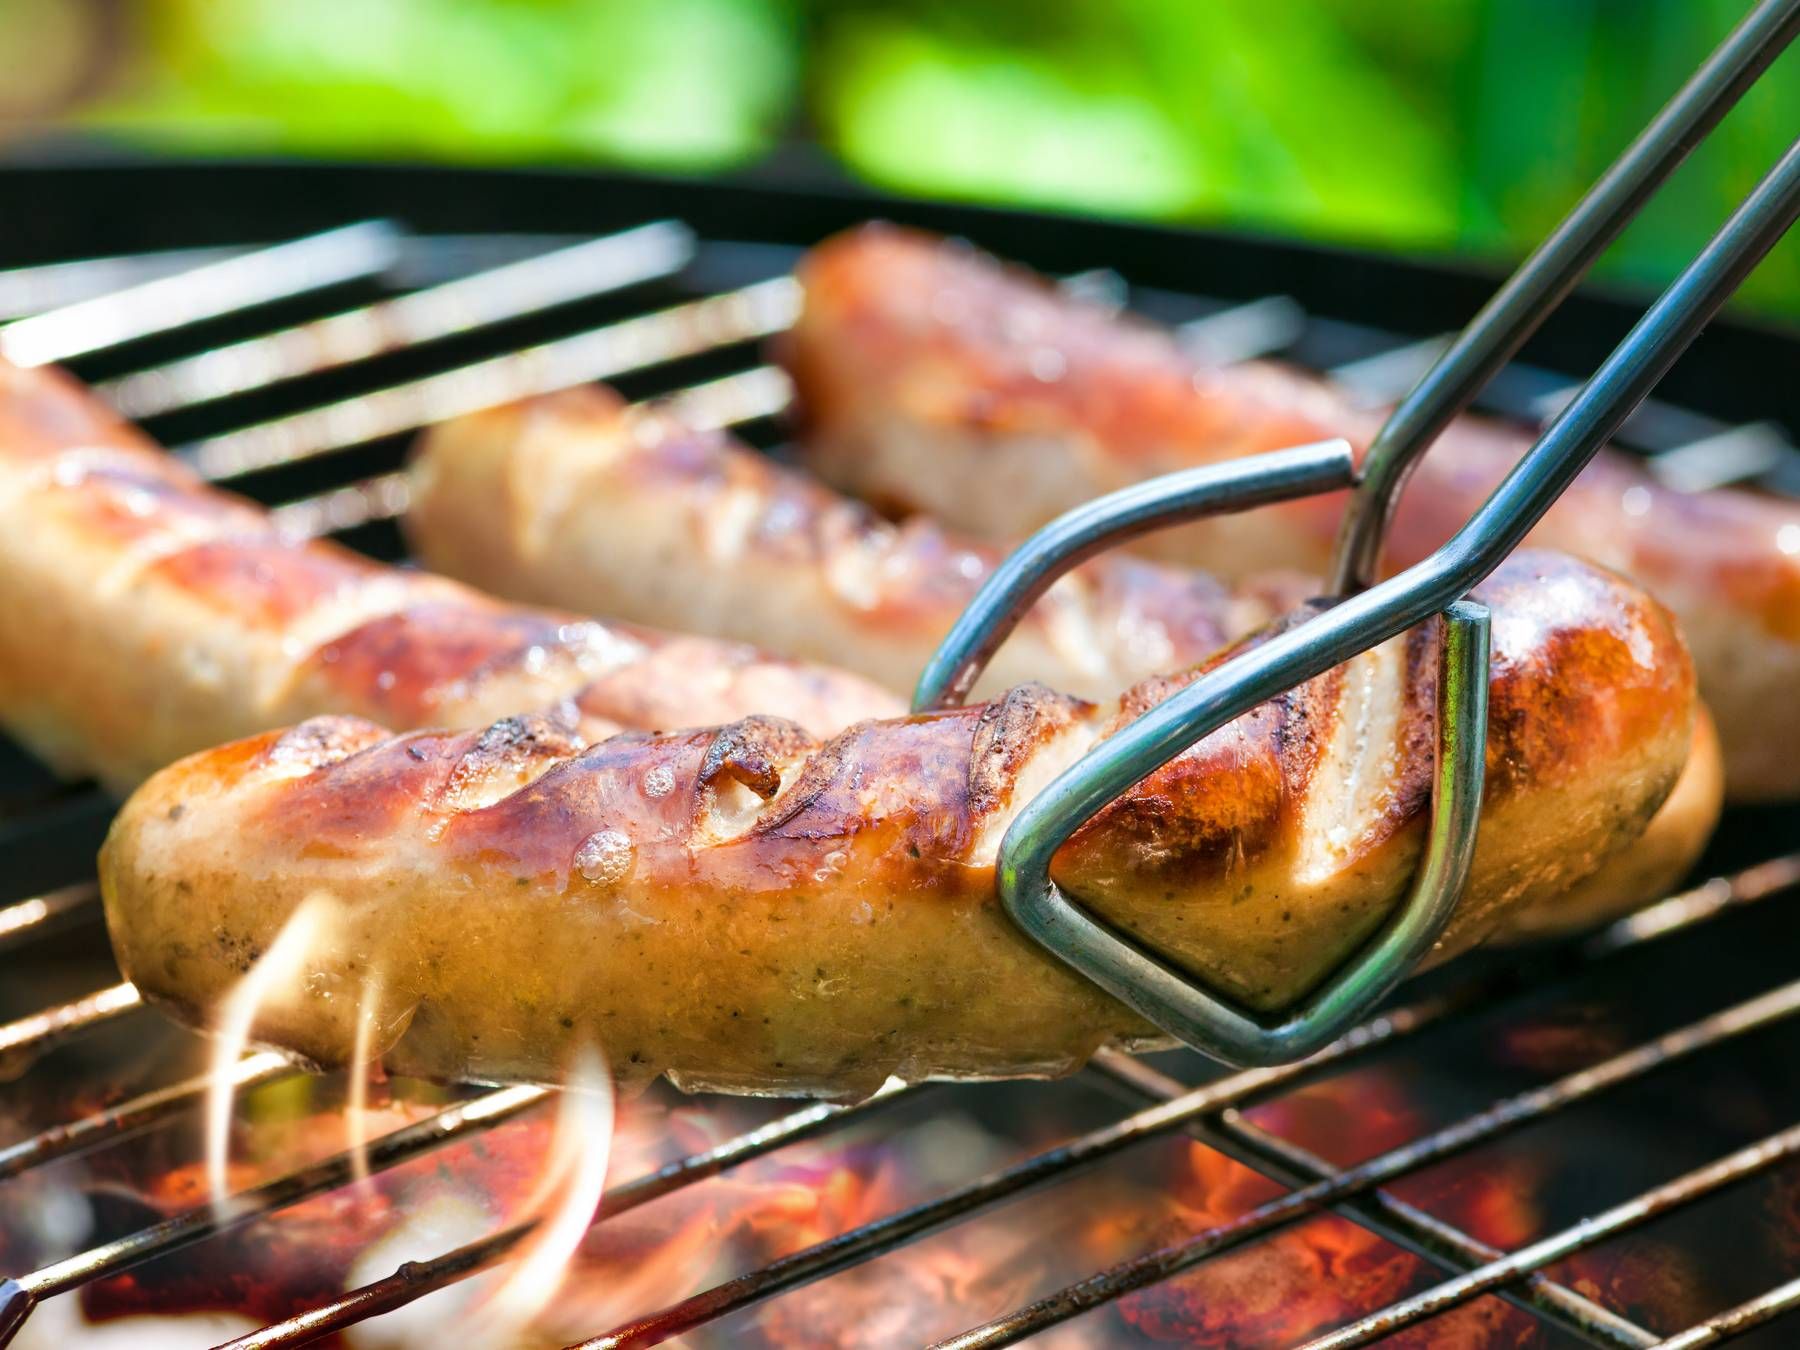 There are ways to grill while cutting down on carcinogens.